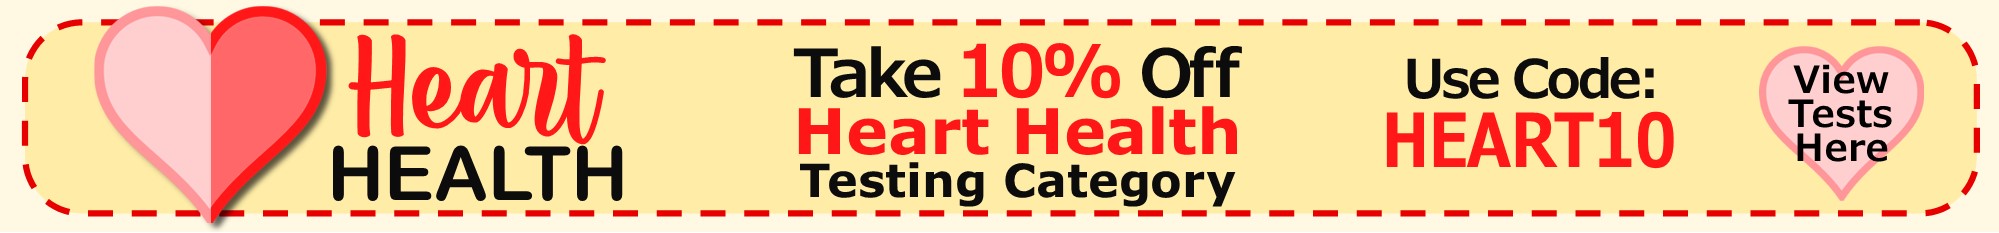 Heart Health Month 10% Off Heart Health Test Category